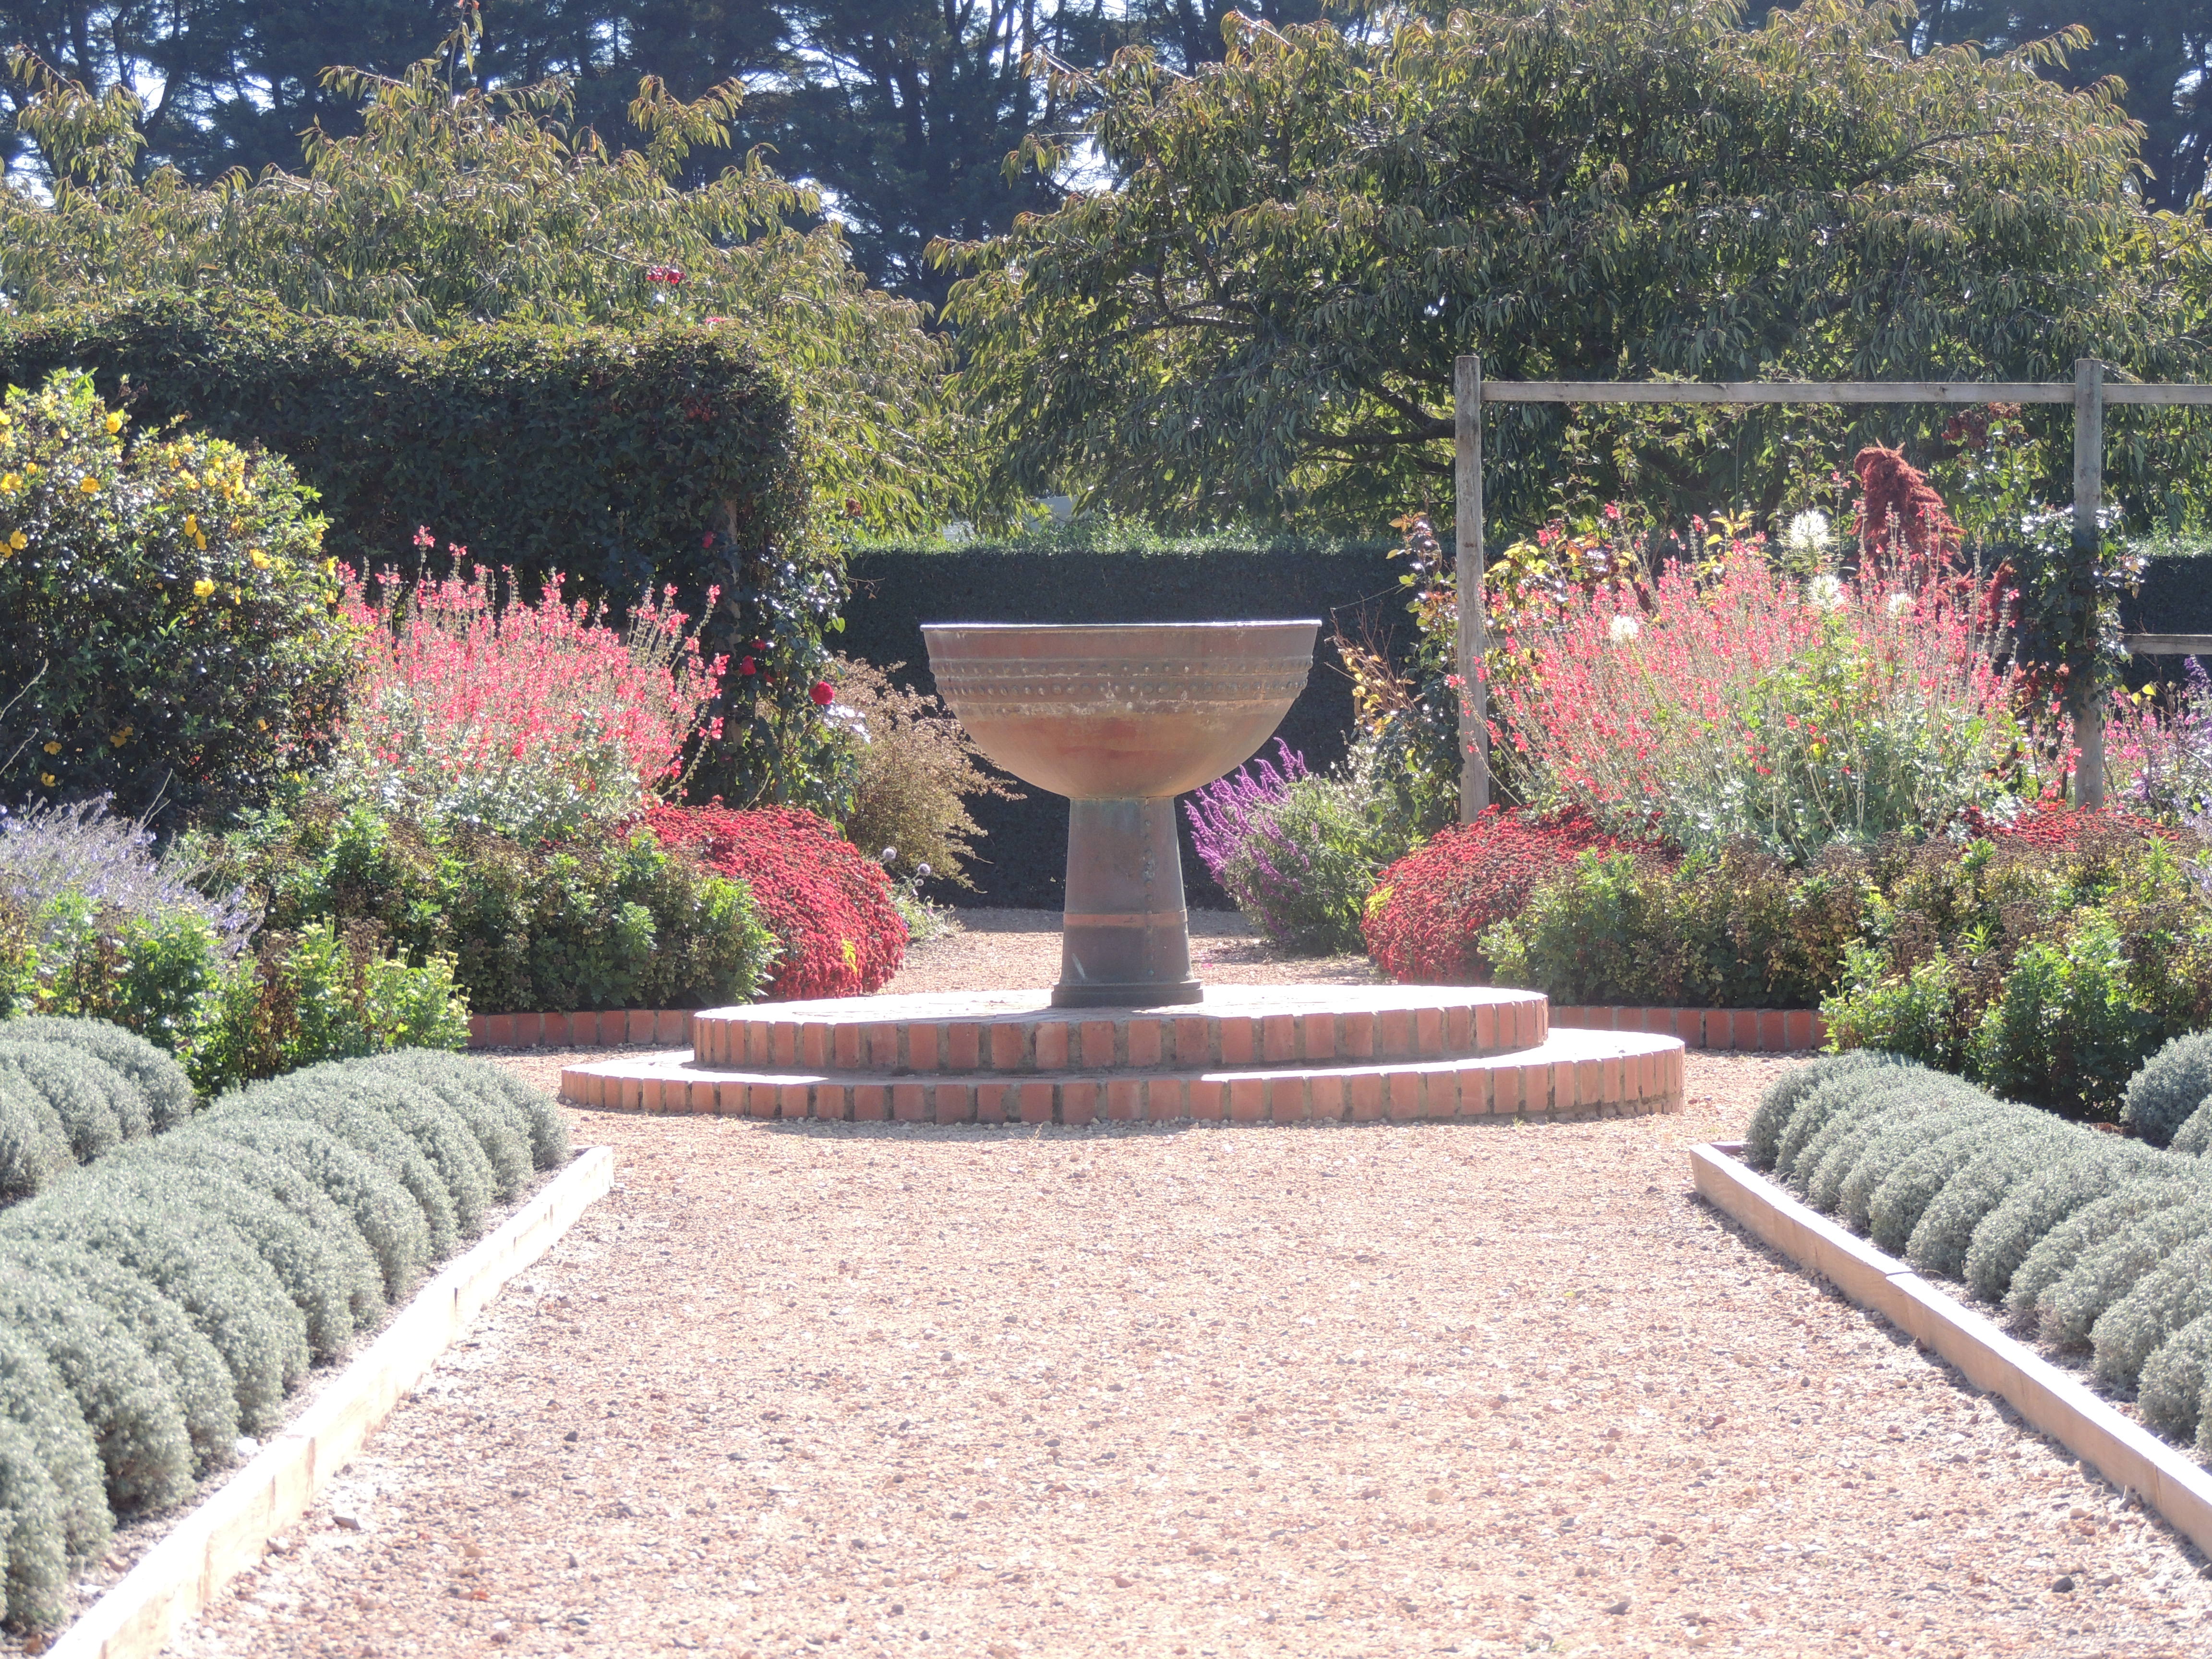 And looking at the urn from the opposite direction, the visitor sees a much more formal aspect with carefully clipped hedges flanking an immaculate path.